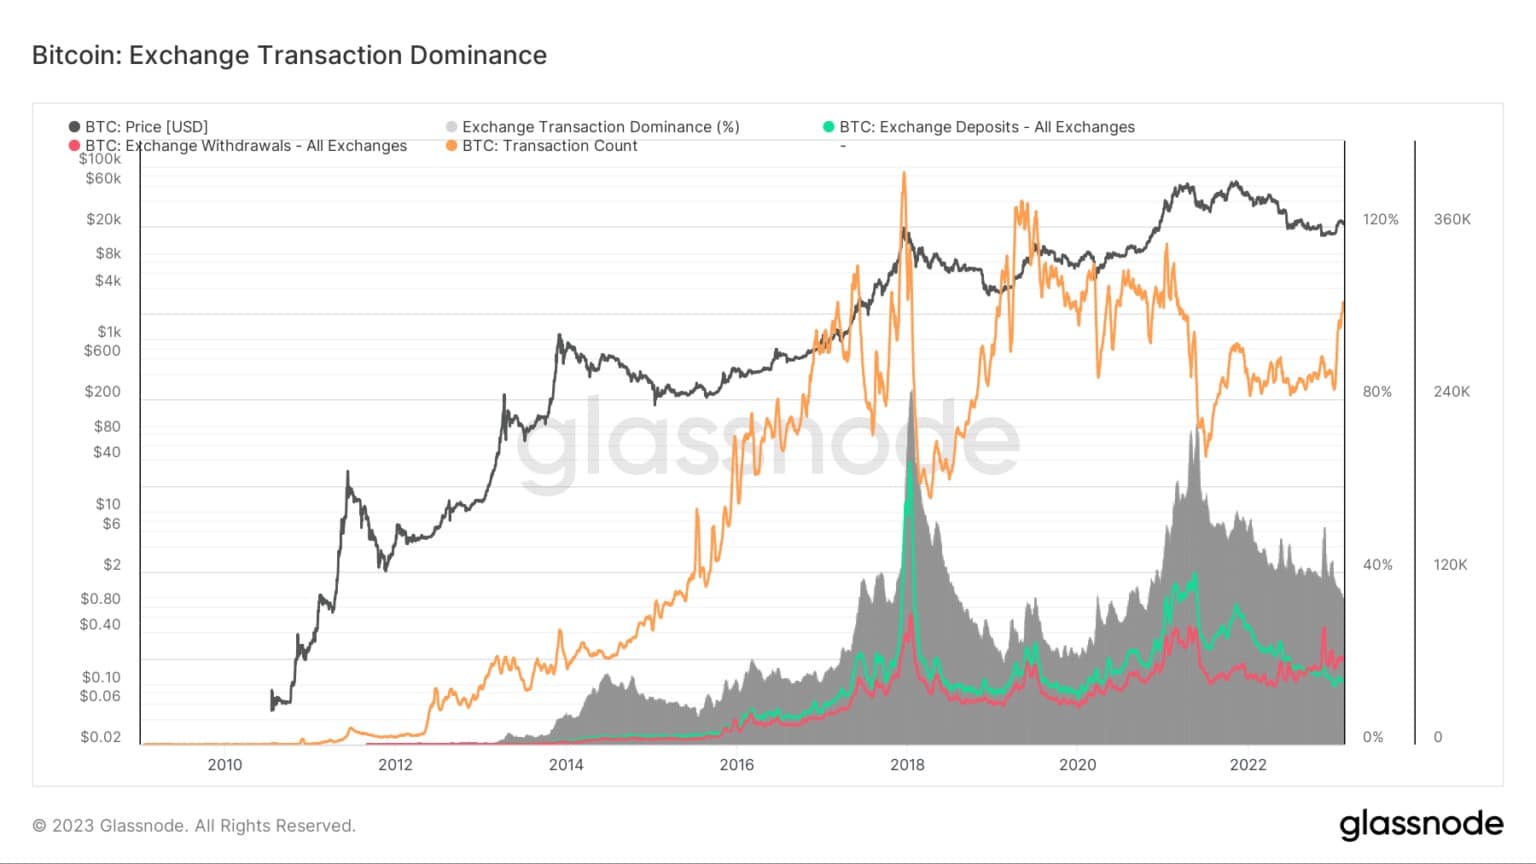 Graph showing the exchange transaction dominance for Bitcoin from 2010 to 2023 (Source: Glassnode)